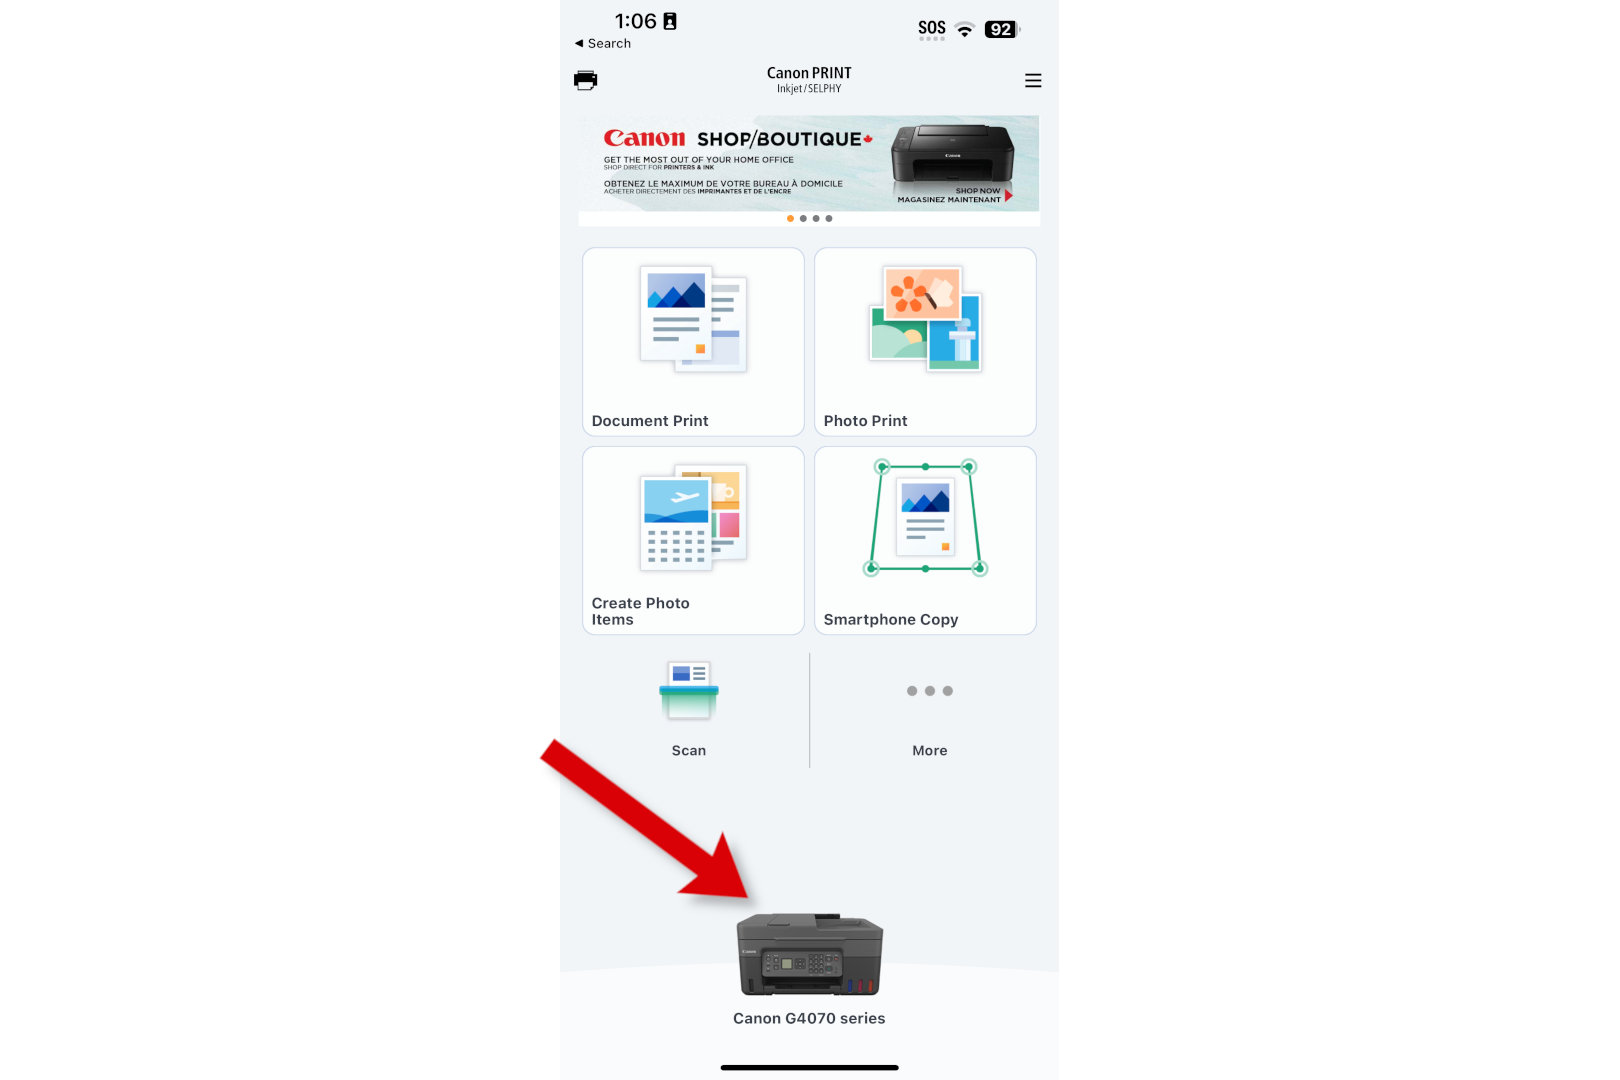 A screenshot of the Canon Print app with an arrow pointing to the printer at the bottom.